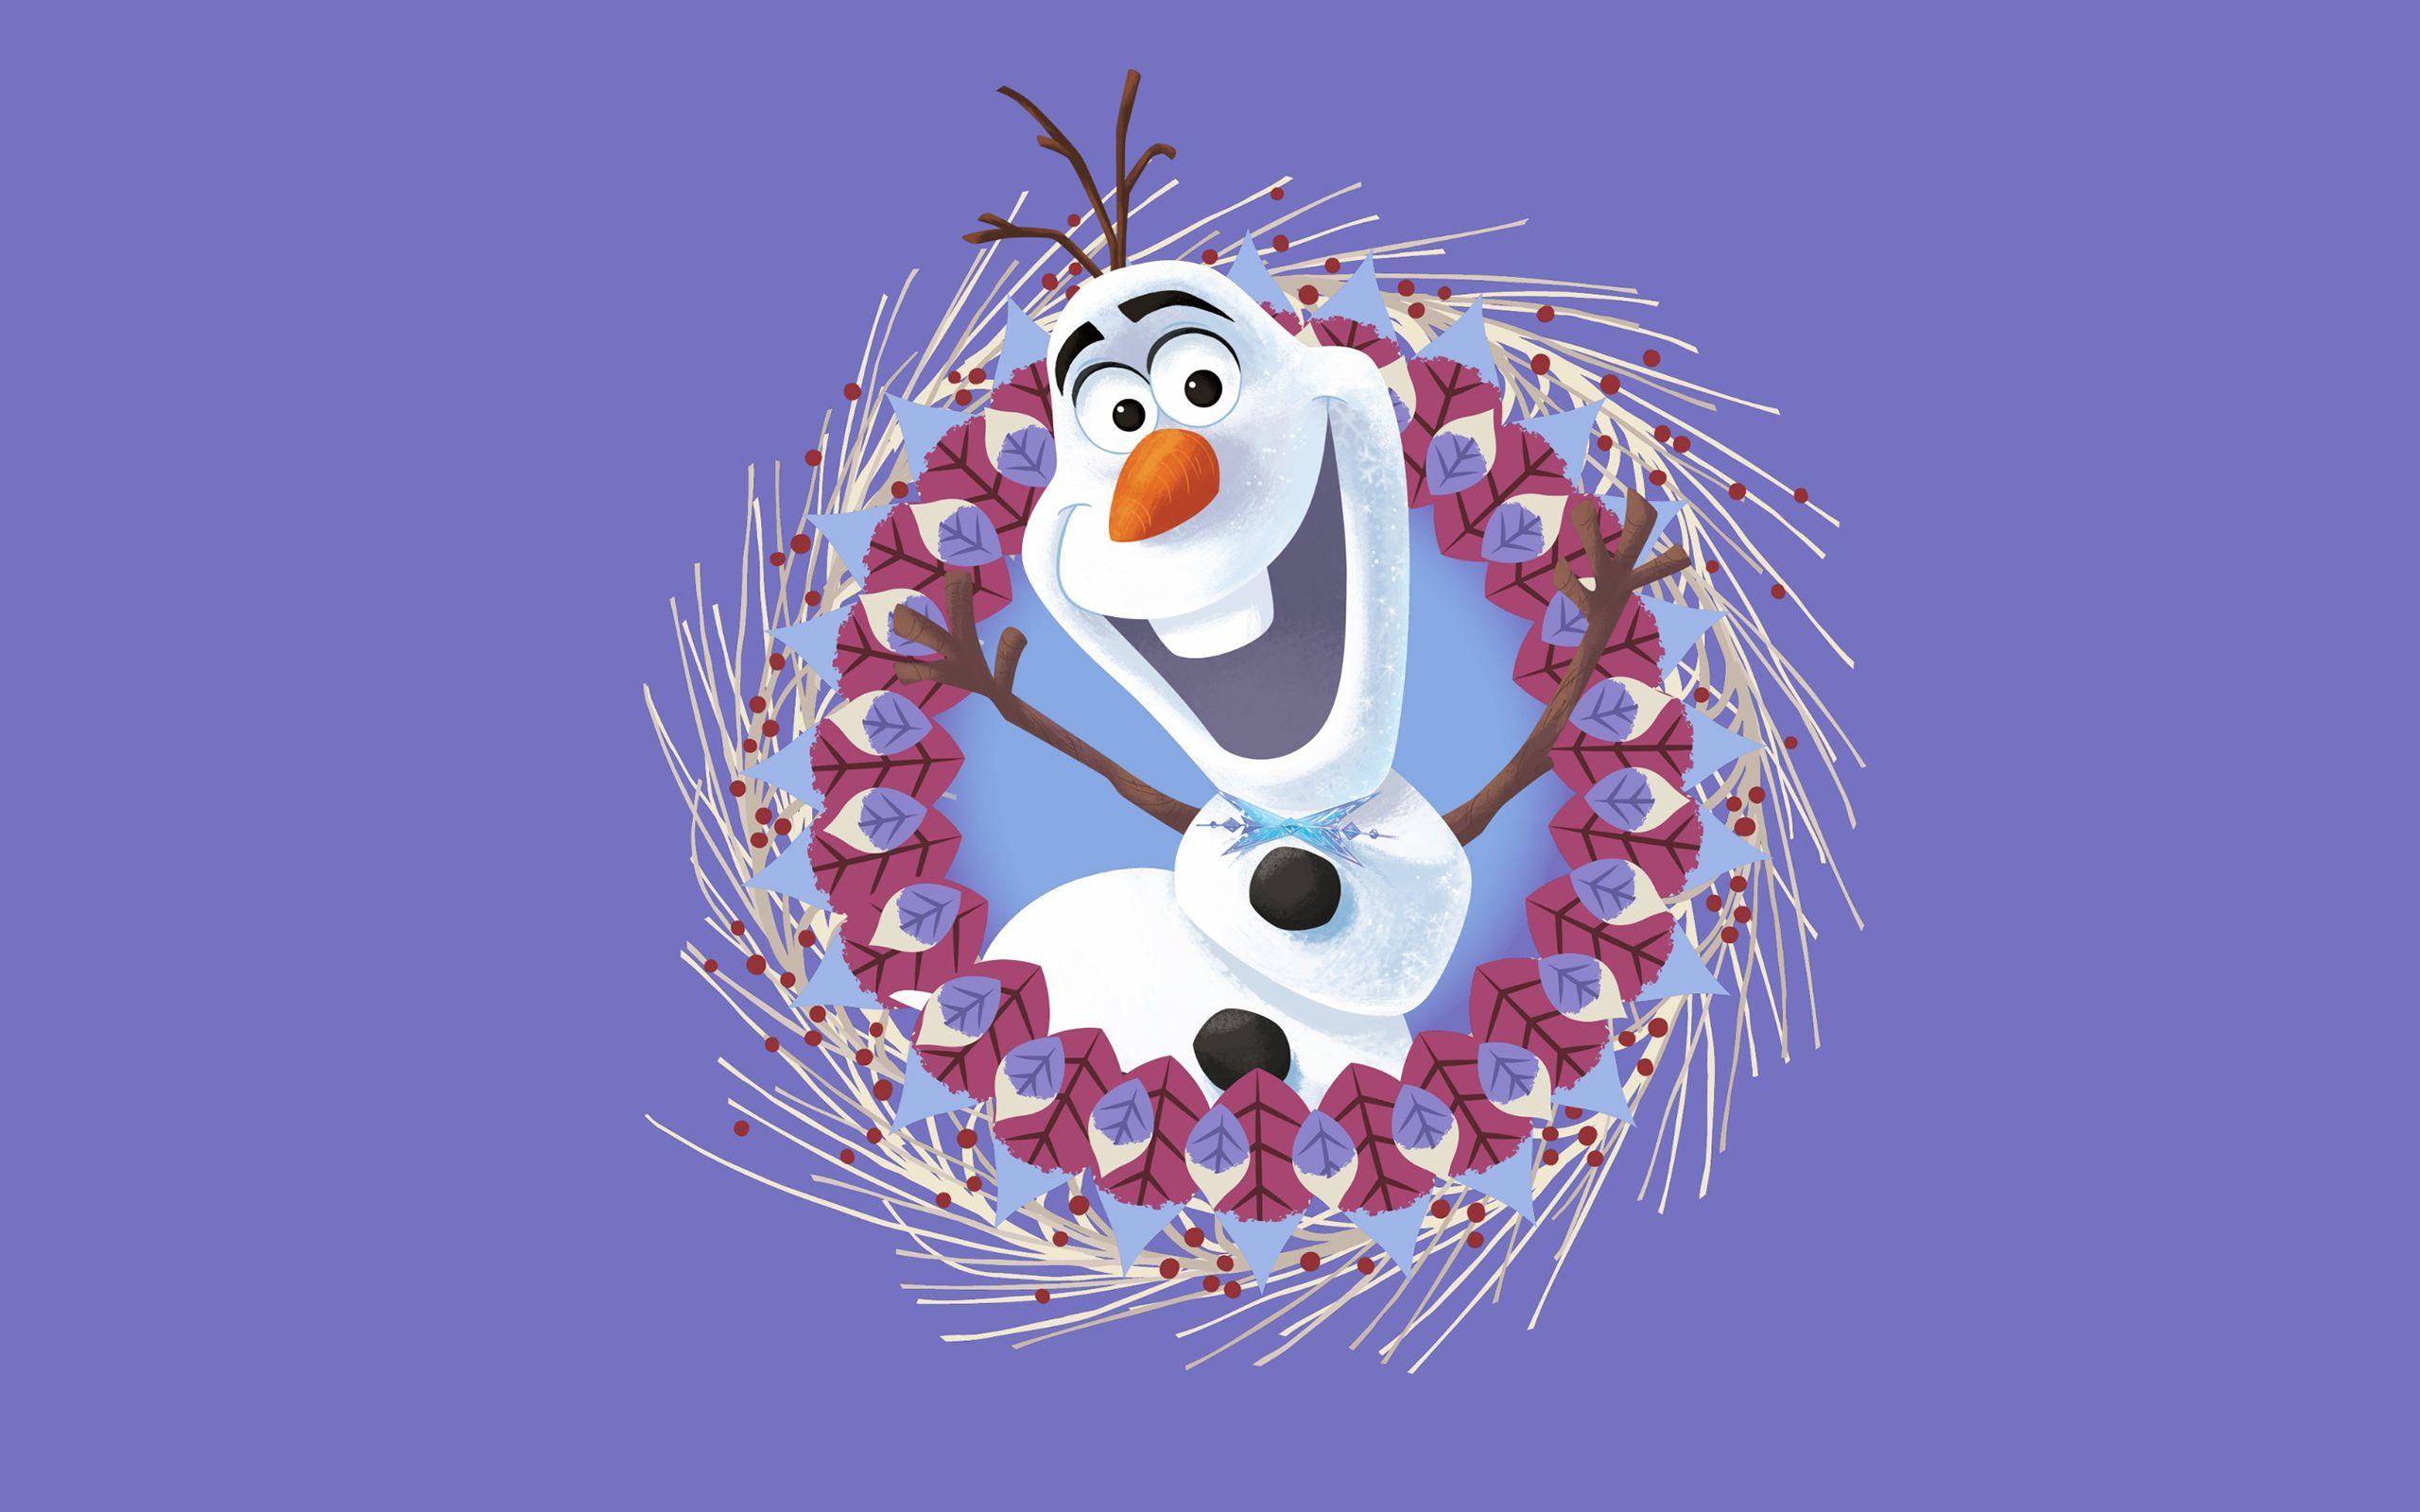 Olaf's Frozen Adventure new wallpaper for winter Holidays